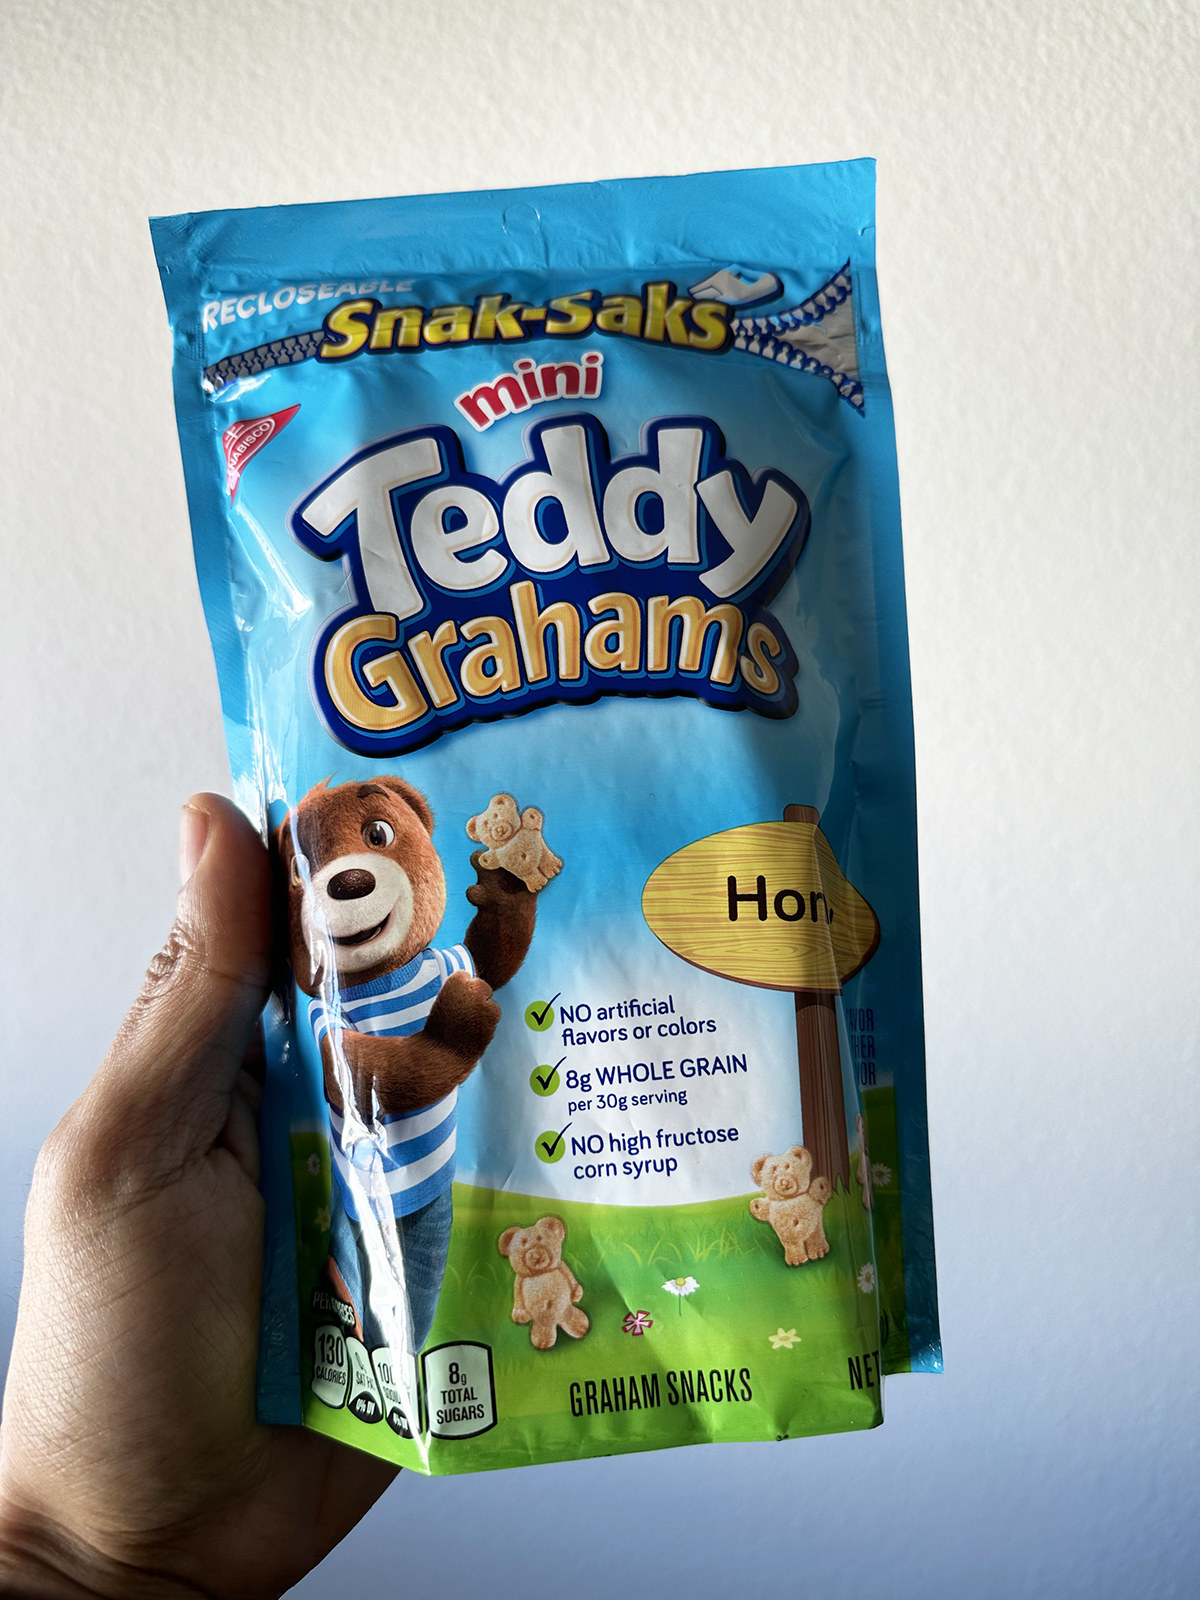 A hand holding a pack of Mini Teddy Grahams snacks